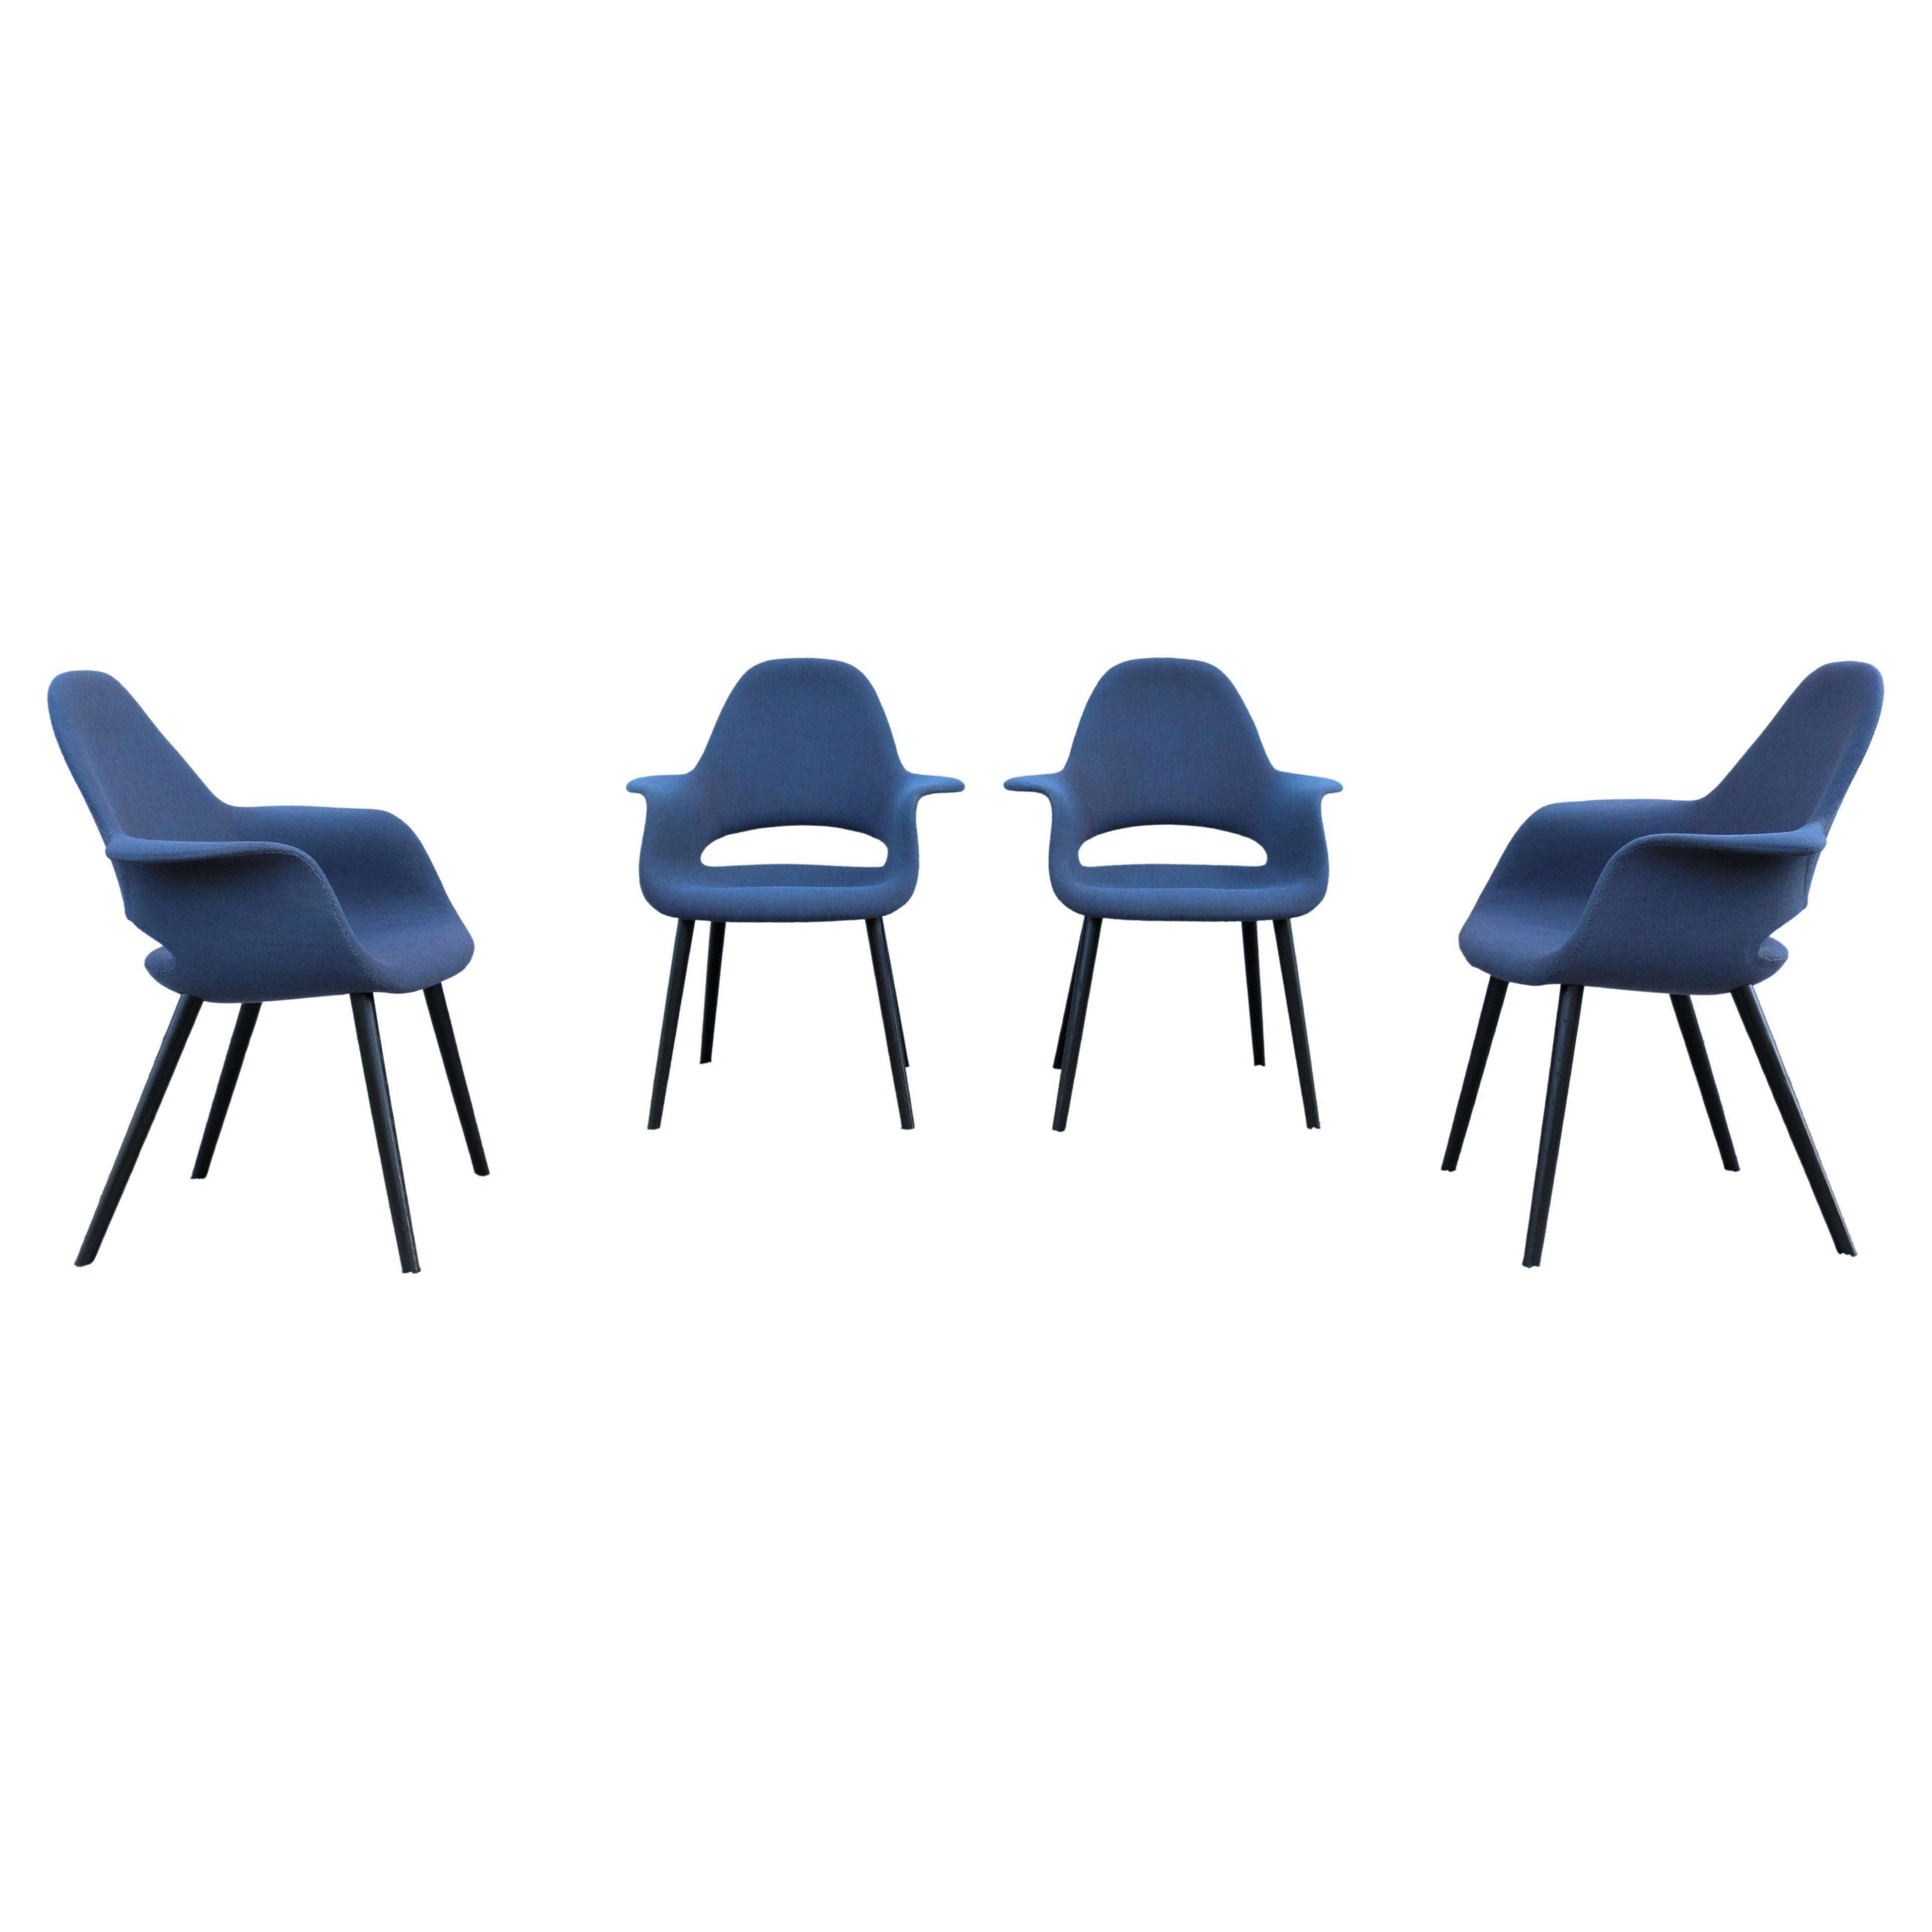 Charles Eames & Eero Saarinen for Vitra Organic Conference Chairs, Set of 4